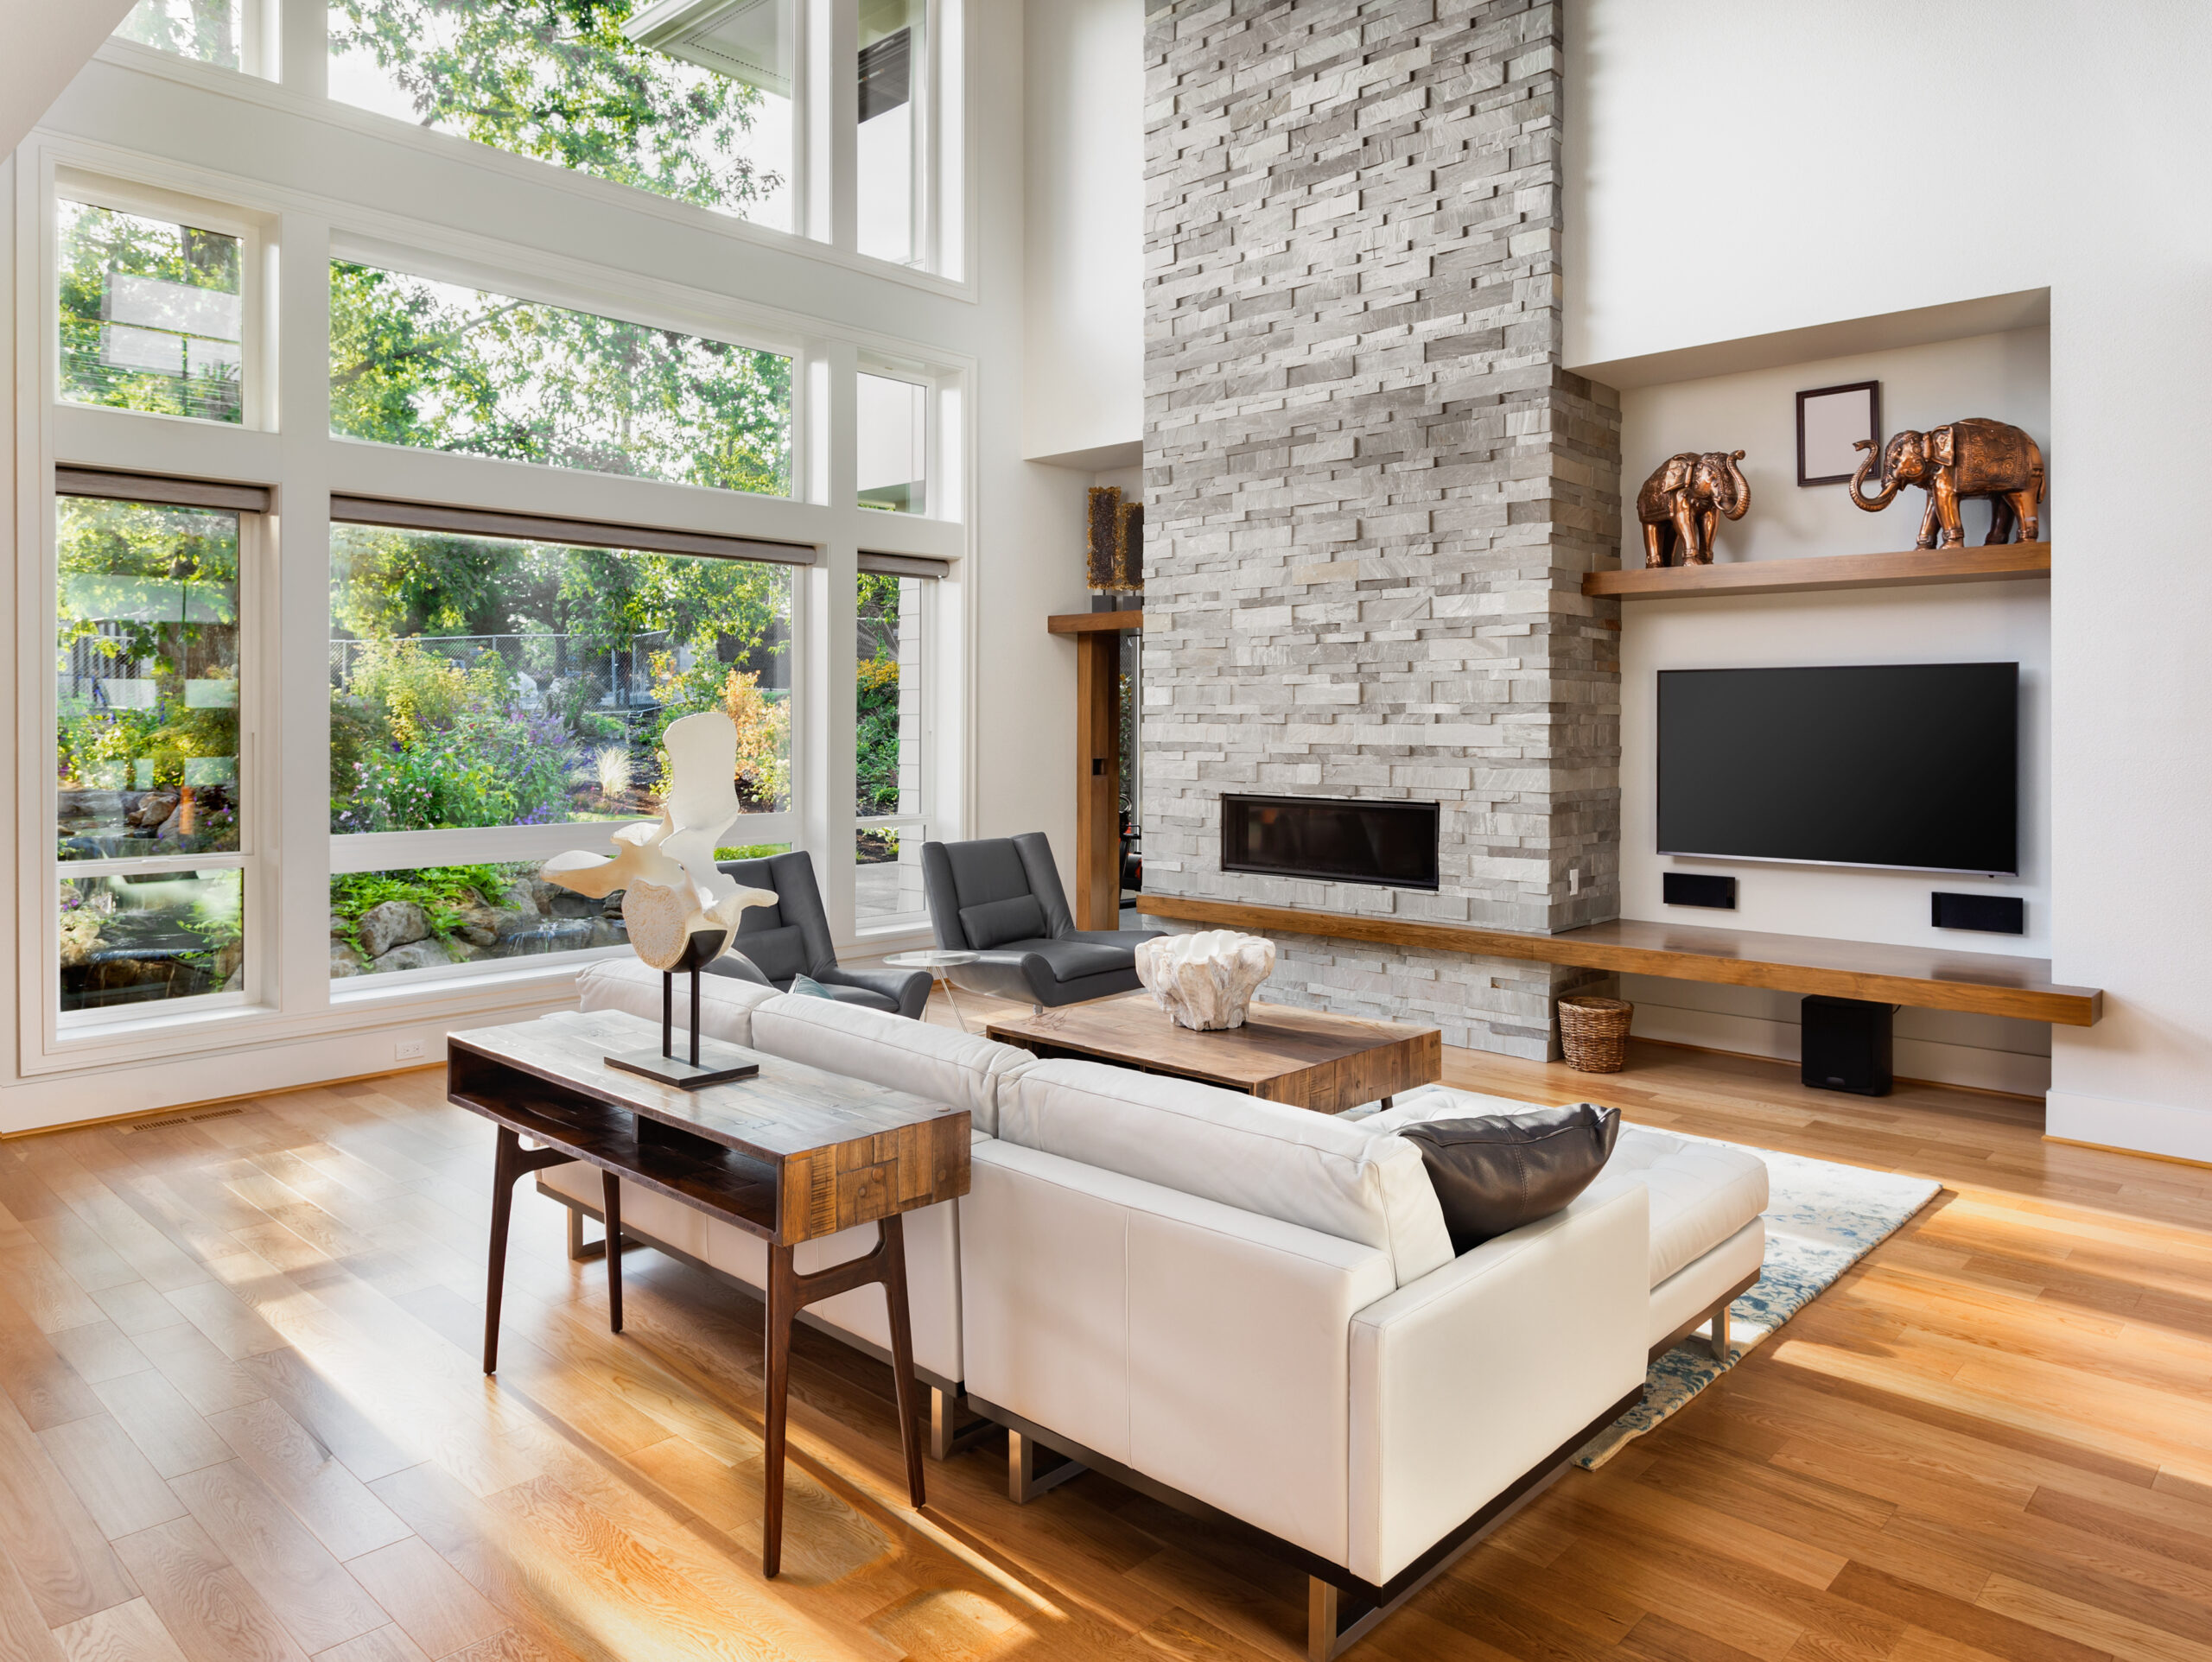 Clean windows bring light into a contemporary living room.